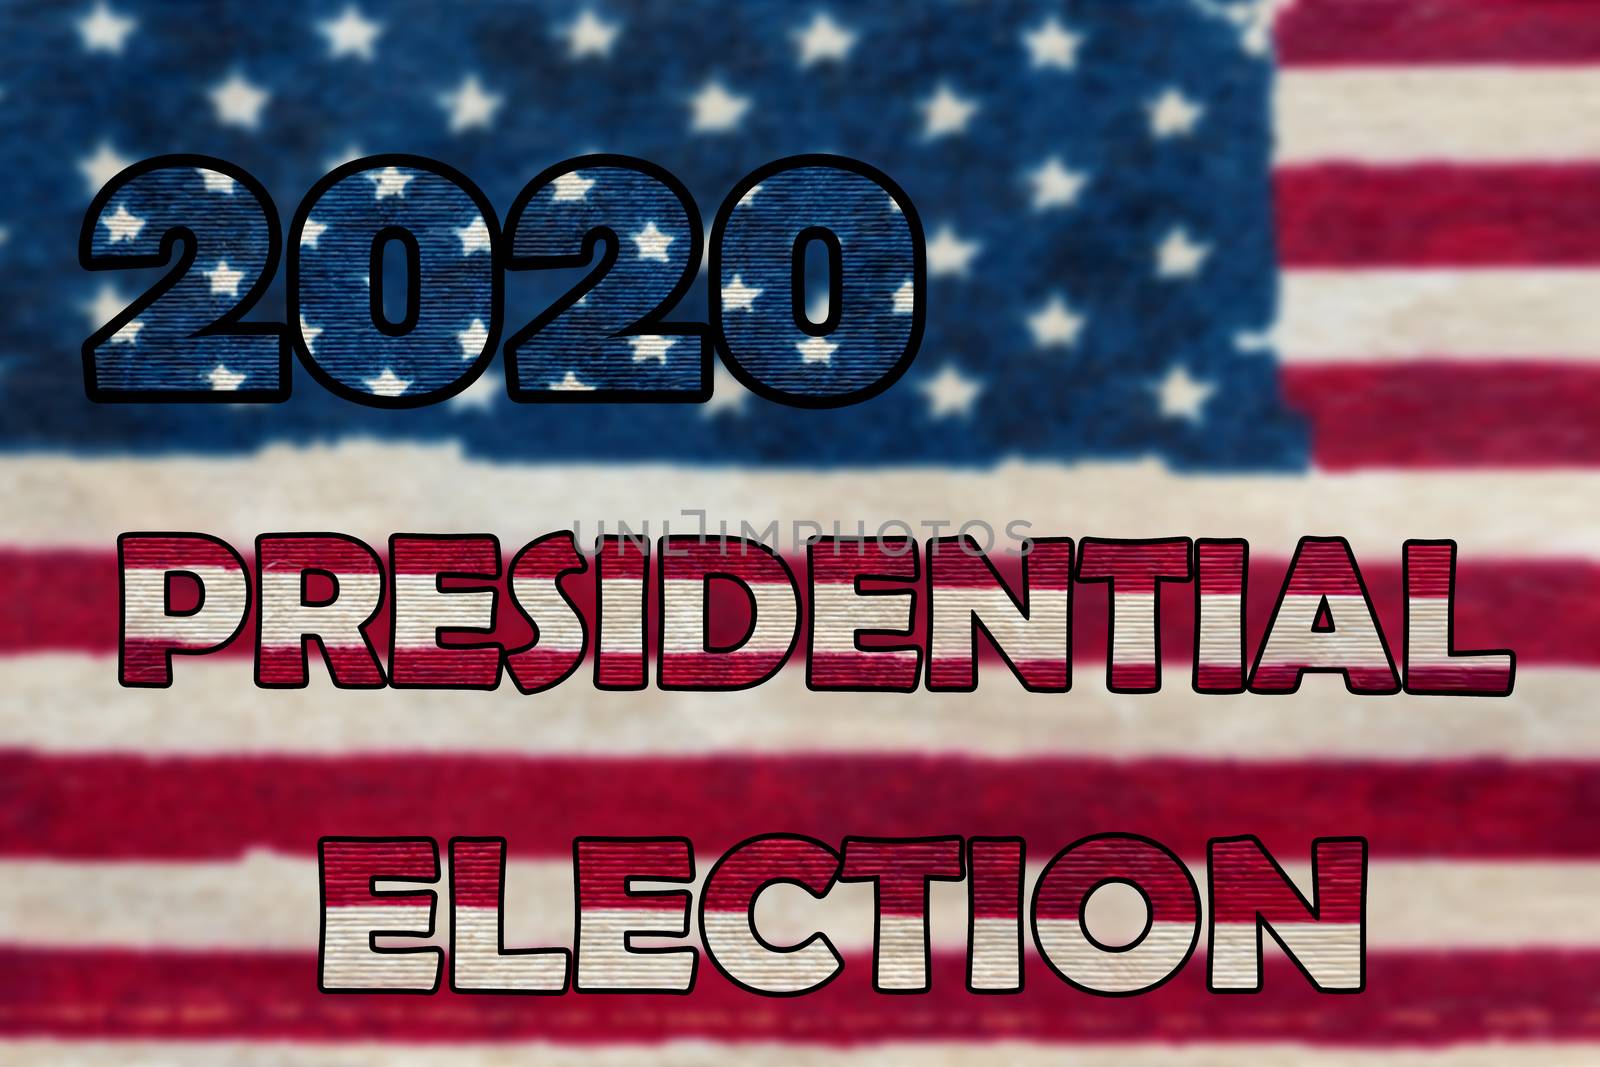 American Presidential Election 2020 background design by bonilook